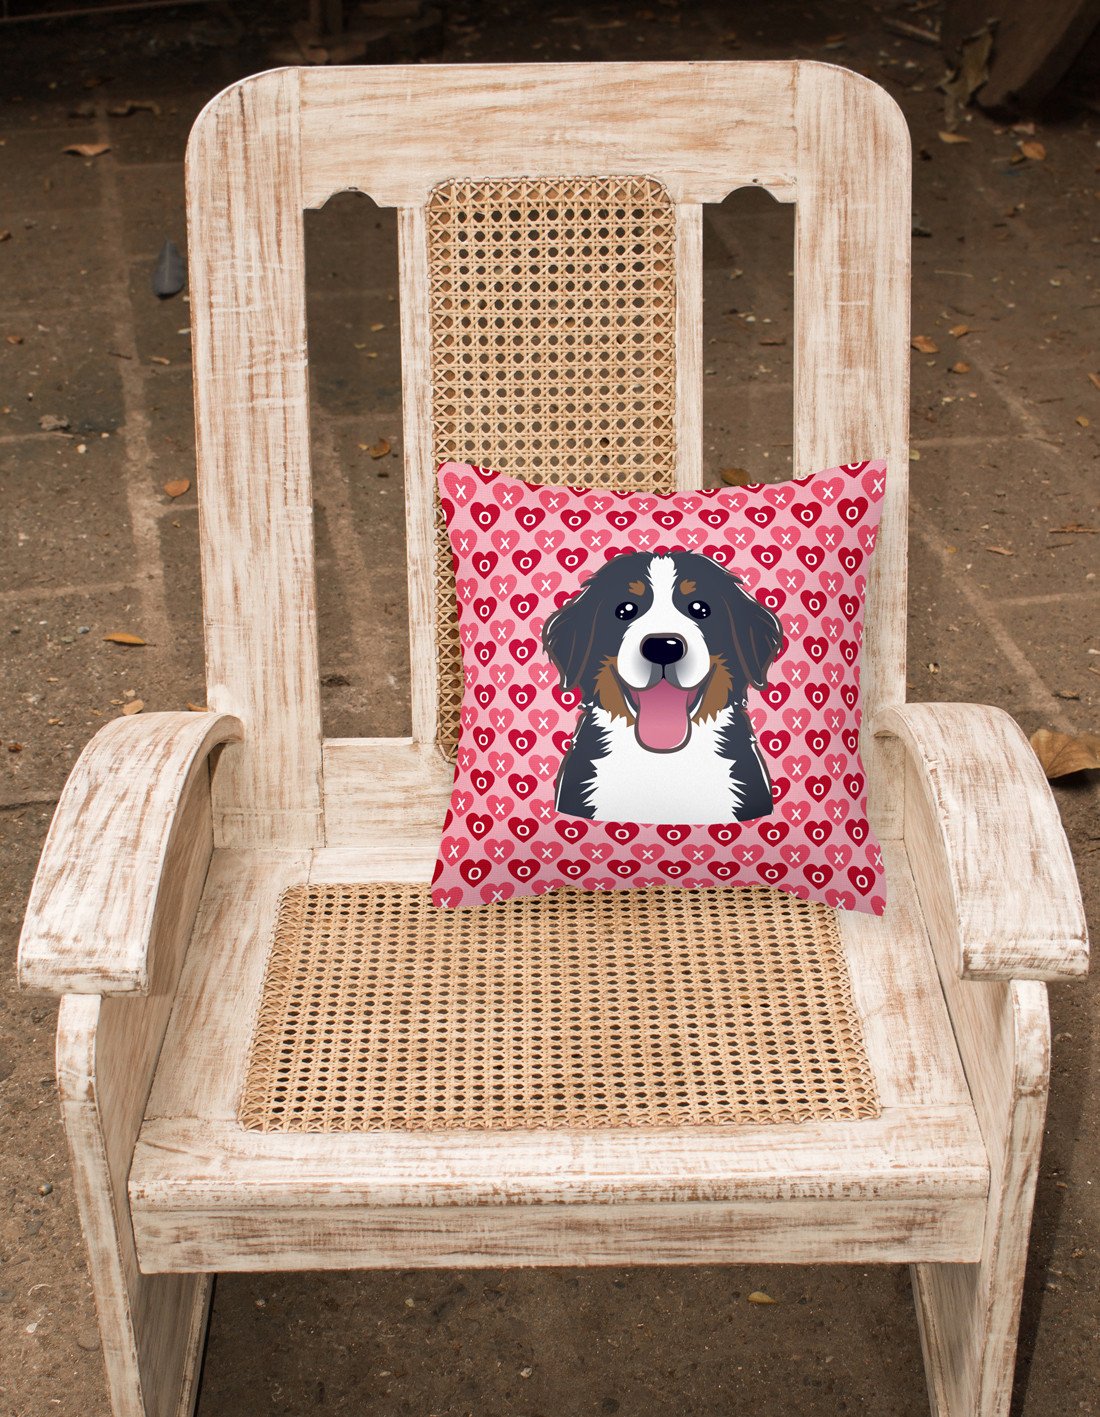 Bernese Mountain Dog Hearts Fabric Decorative Pillow BB5307PW1818 by Caroline's Treasures